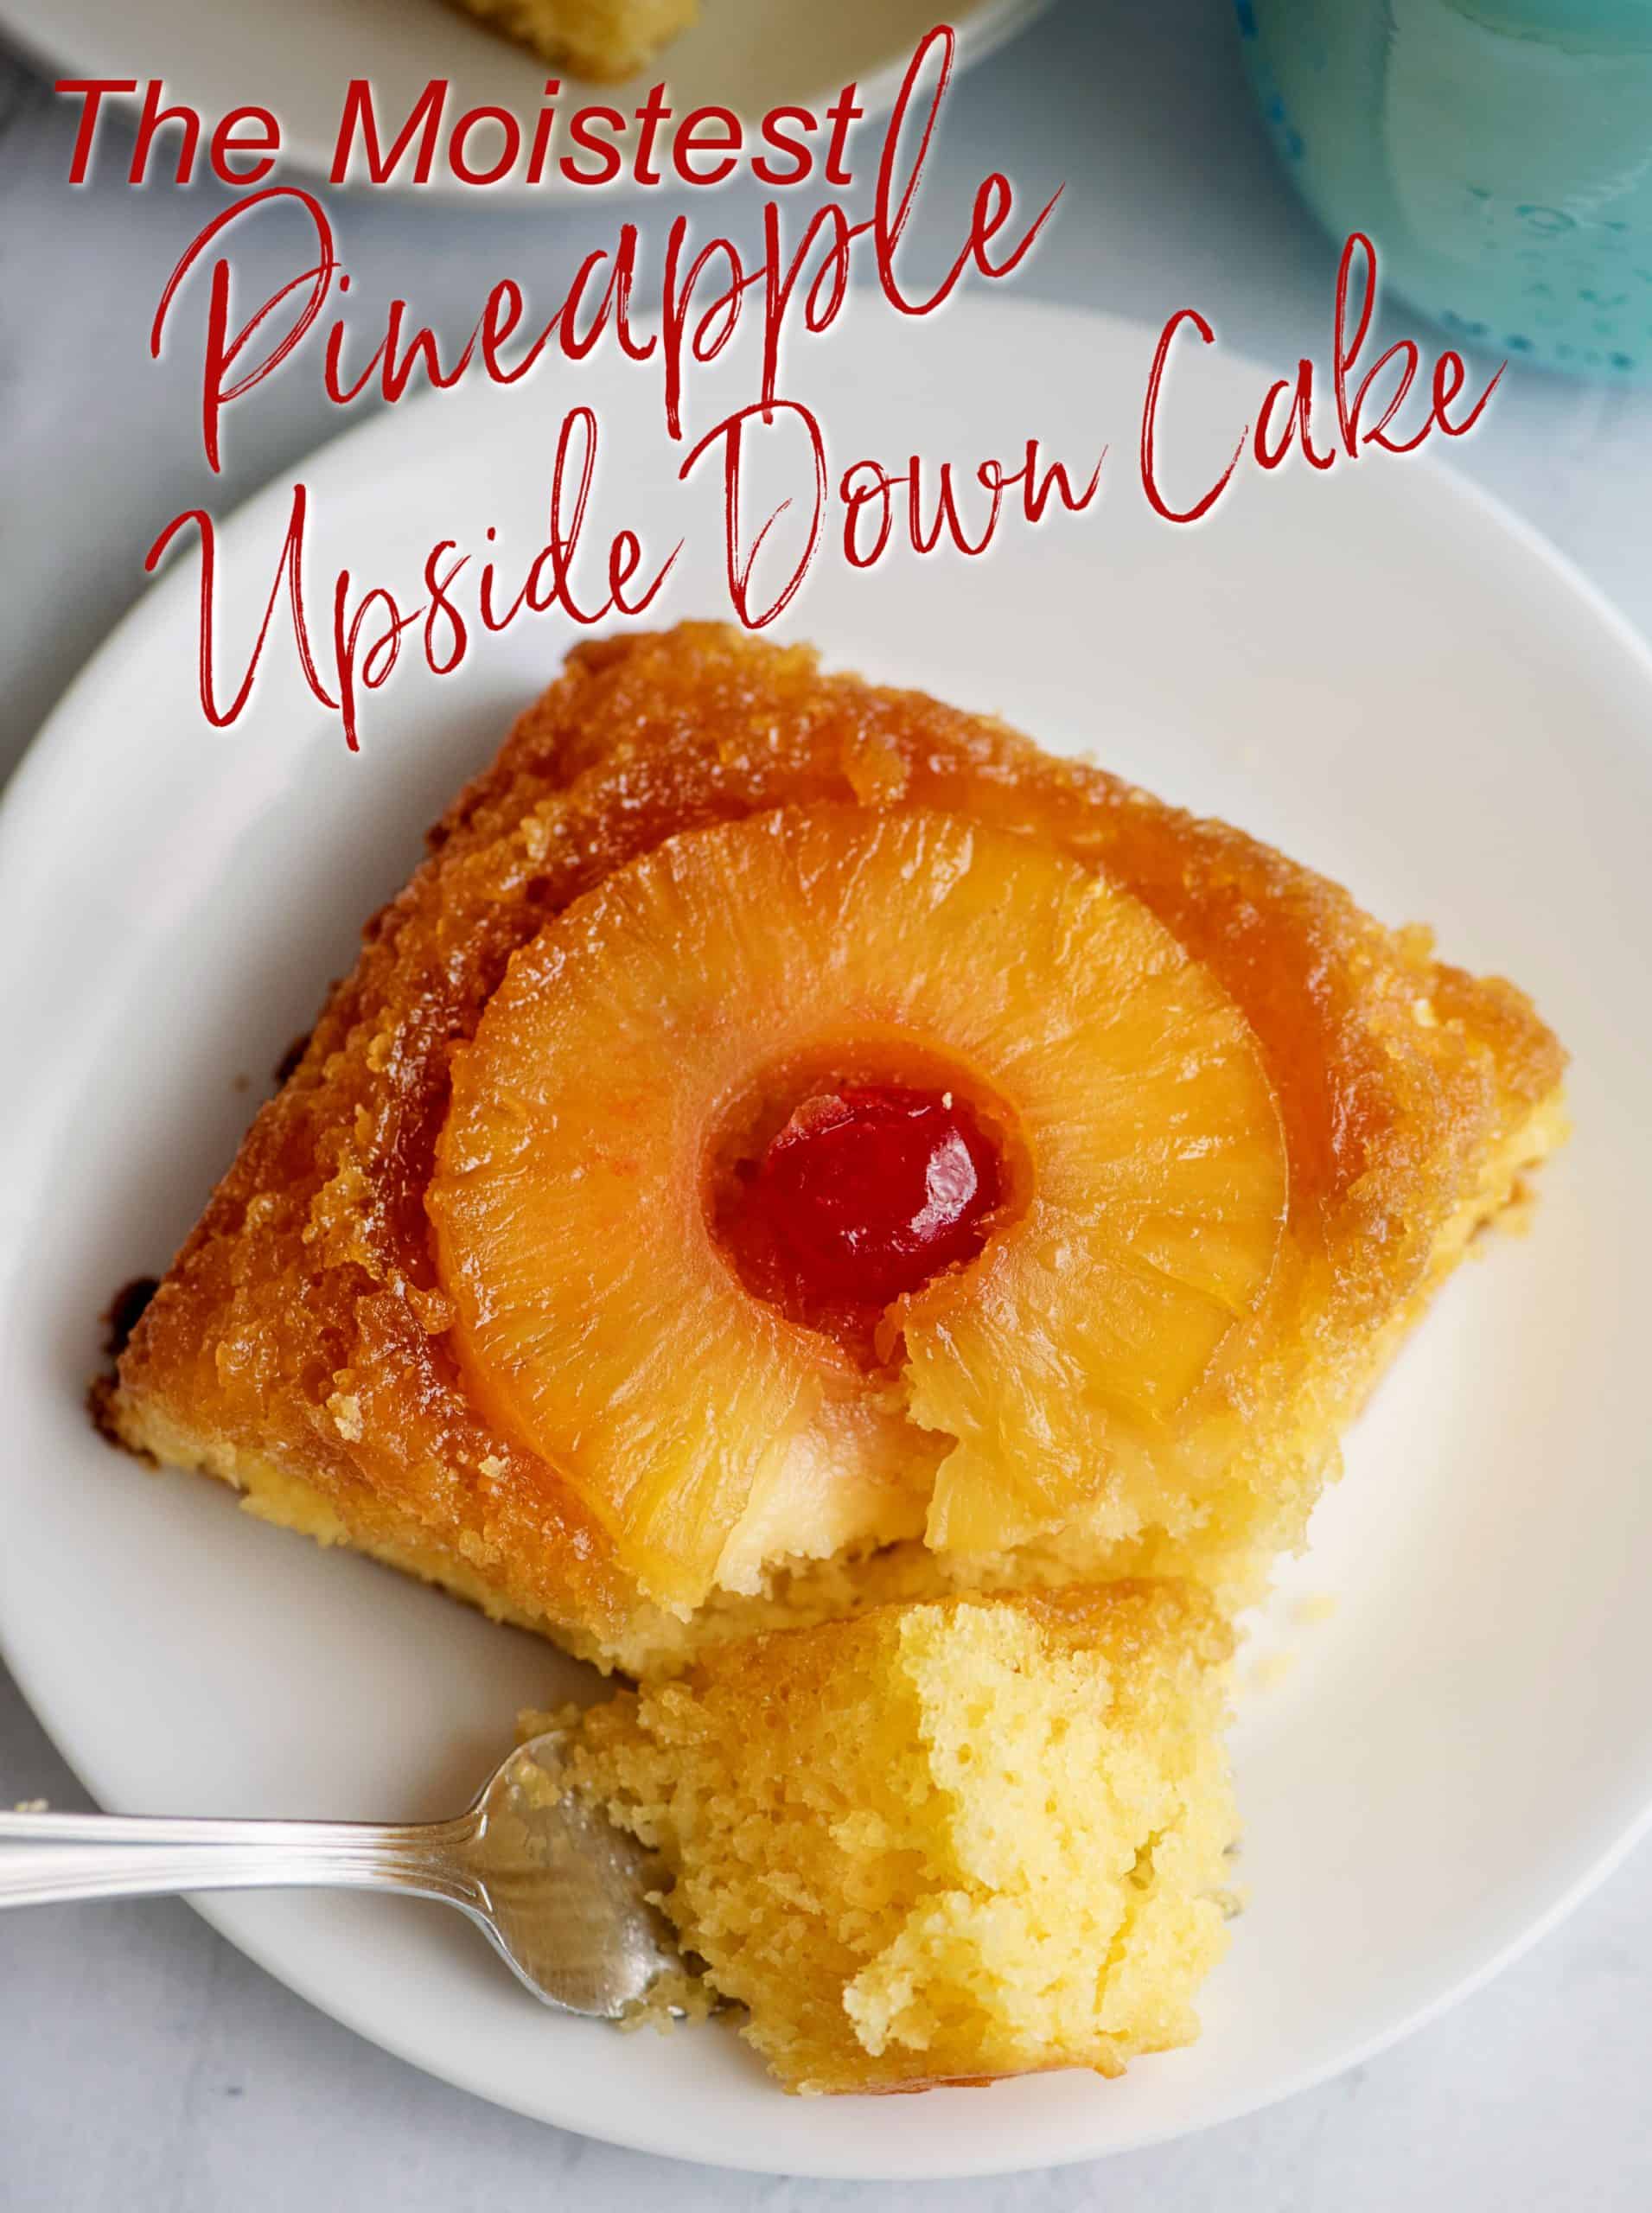 Pin image for easy pineapple upside-down cake.